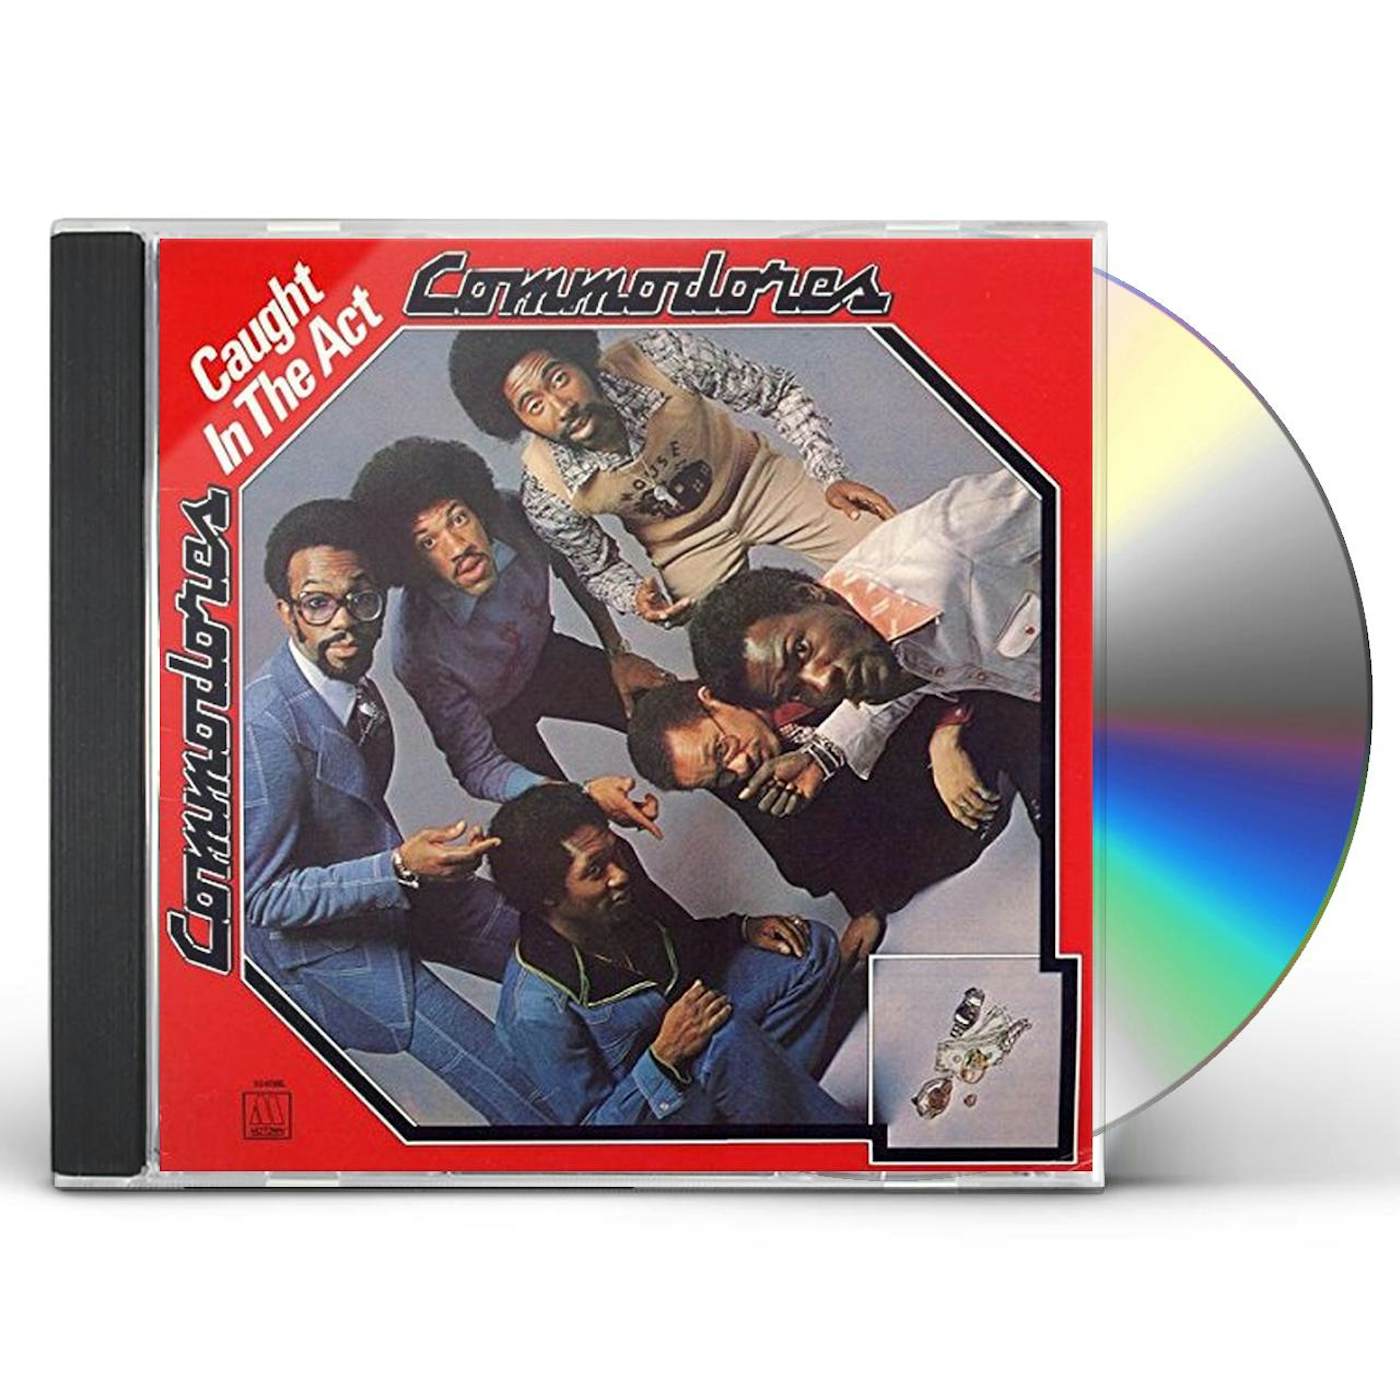 Commodores CAUGHT IN THE ACT CD